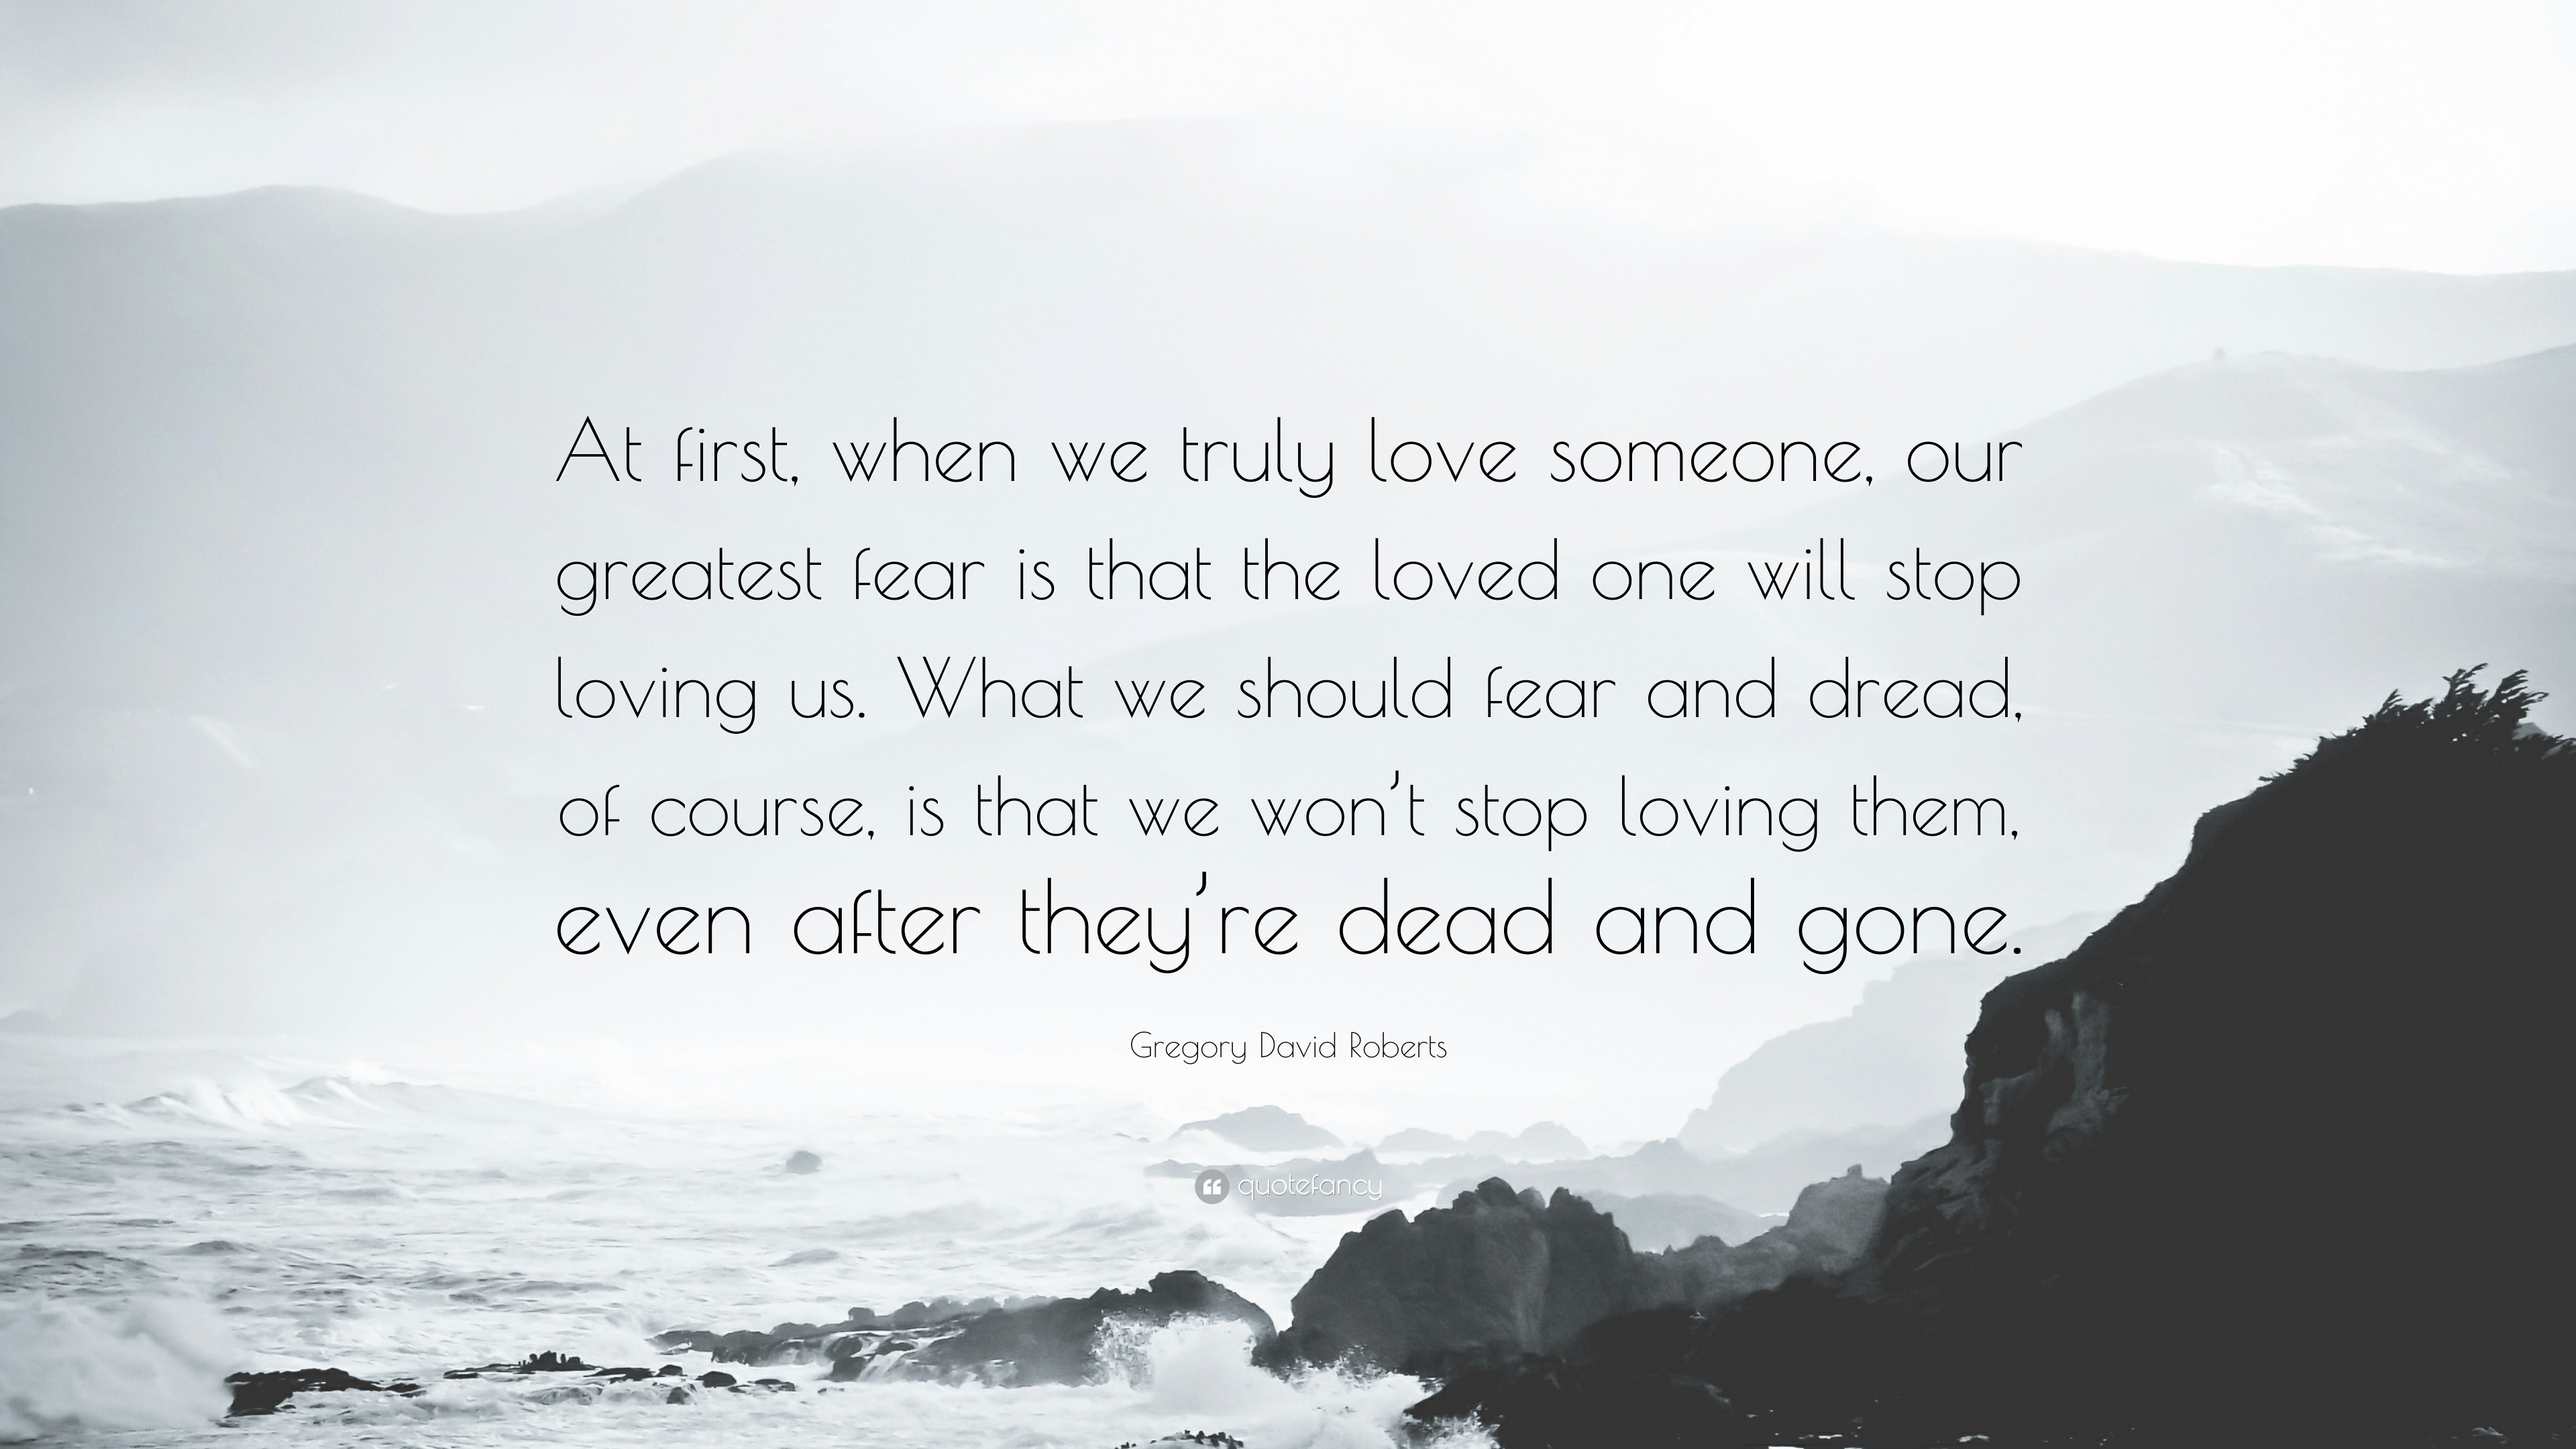 Gregory David Roberts Quote “At first when we truly love someone our